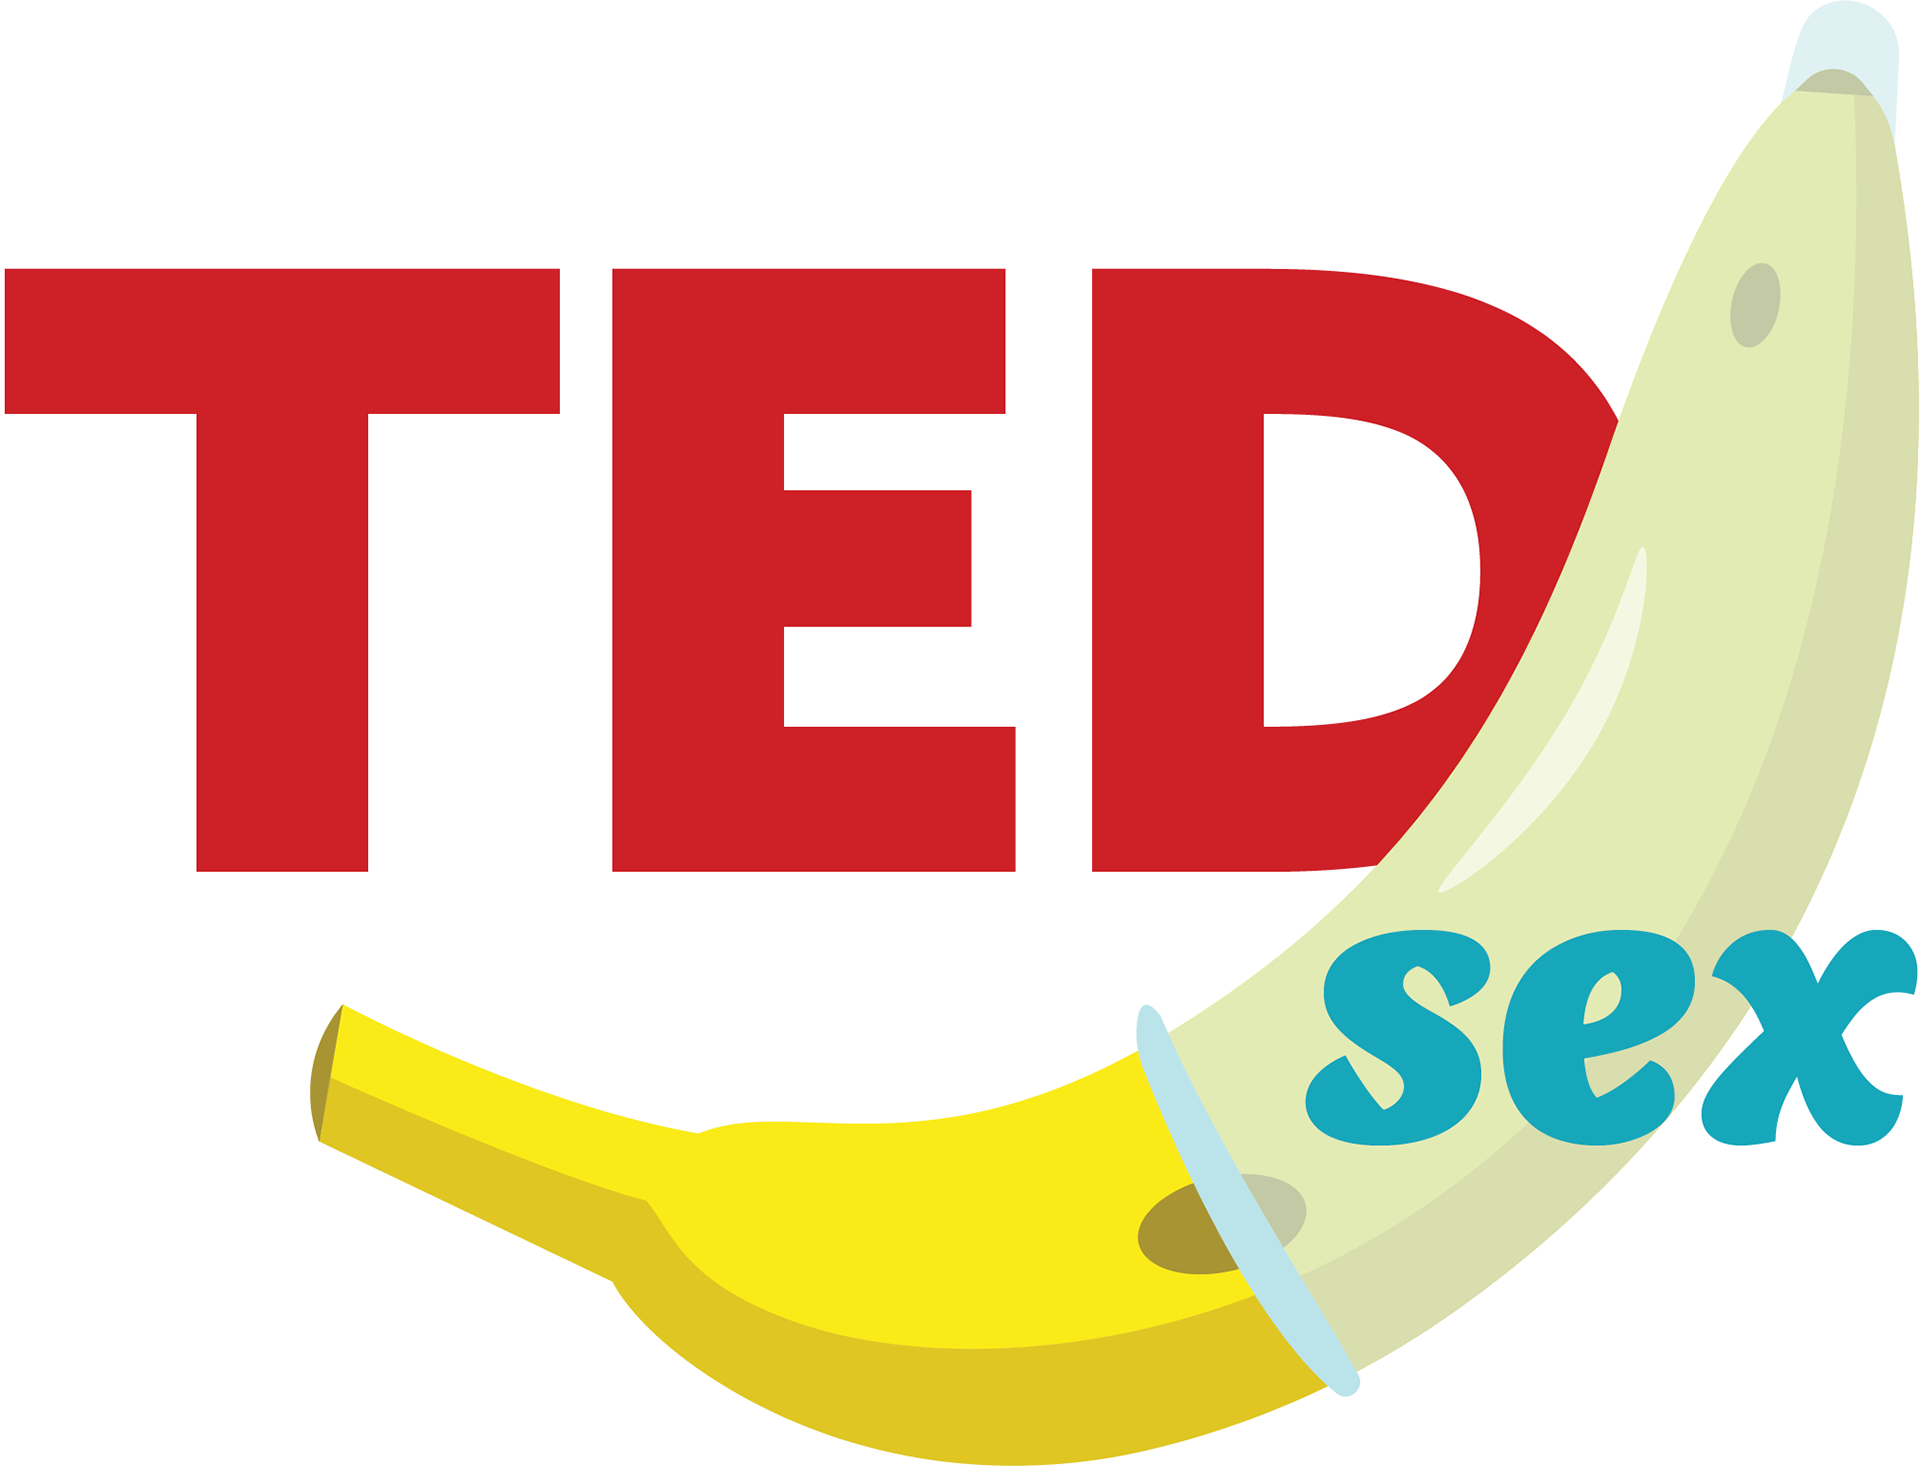 Review Of Tedsex, A Campus Event Focusing On Safe And - United Food Group (1920x1466)